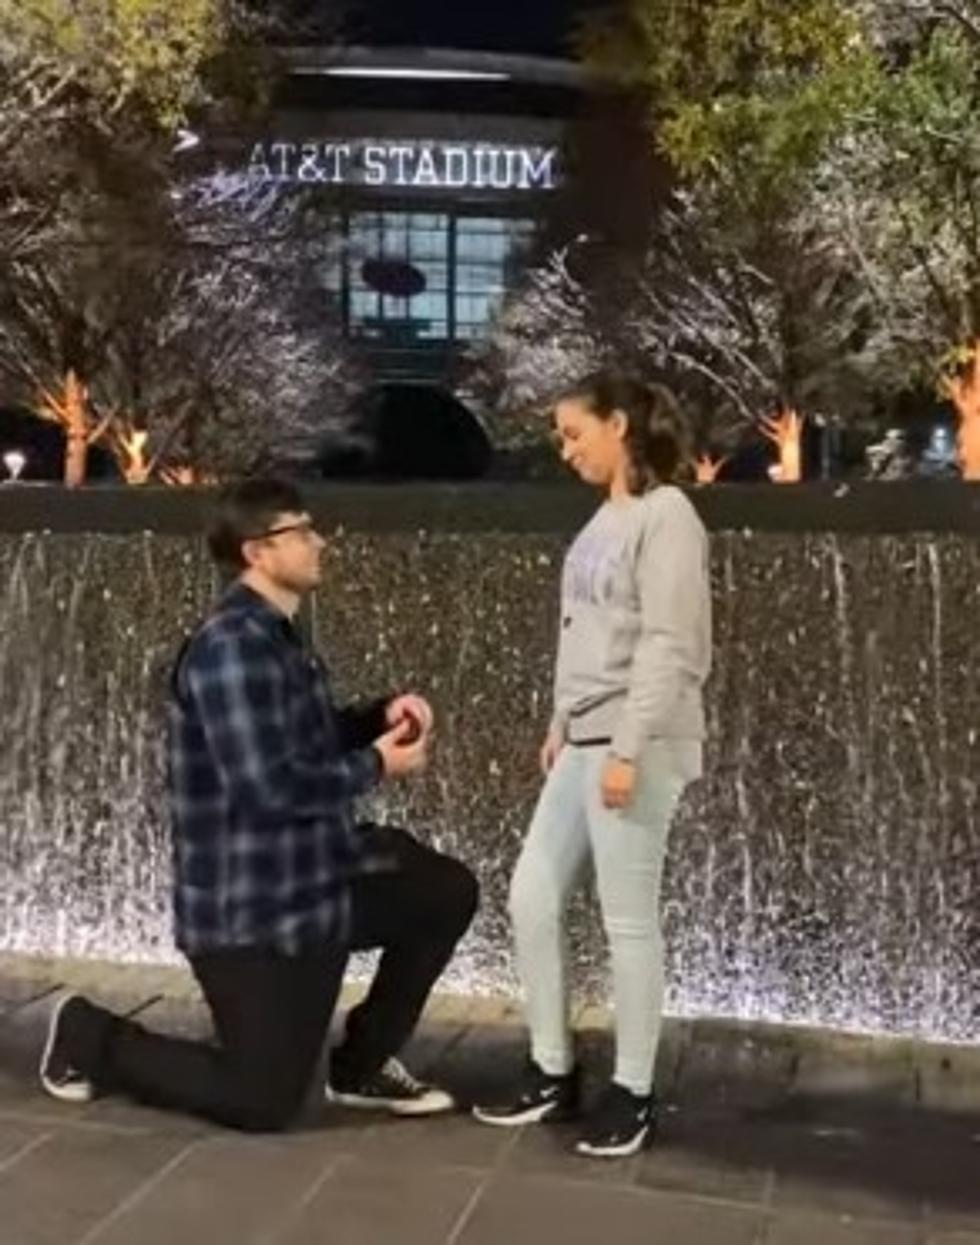 Dallas Cowboys Proposal Goes Very Wrong, Guy Loses Ring for 30 Minutes